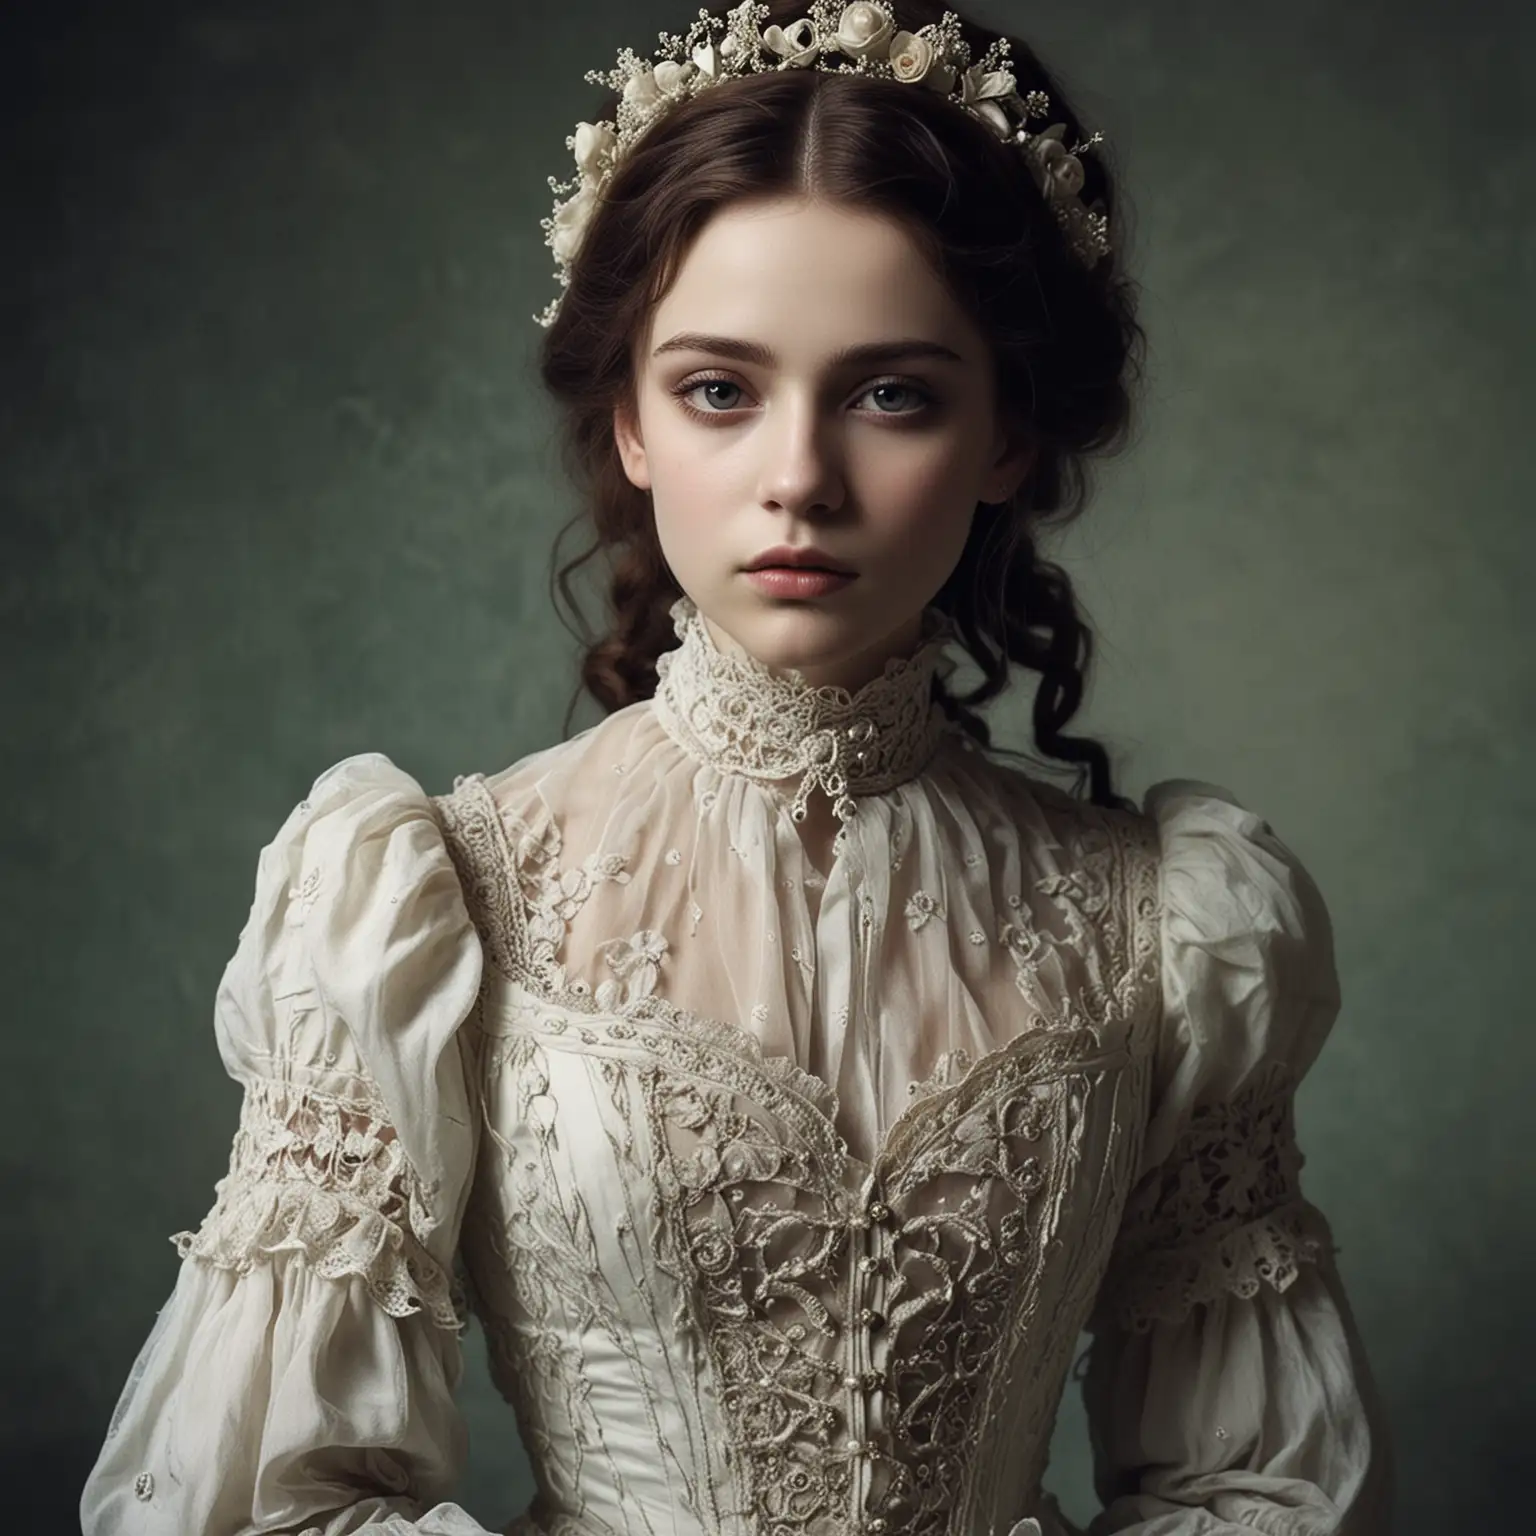 Ethereal Lydia in Victorian Inspired Attire with Haunting Beauty and Strength